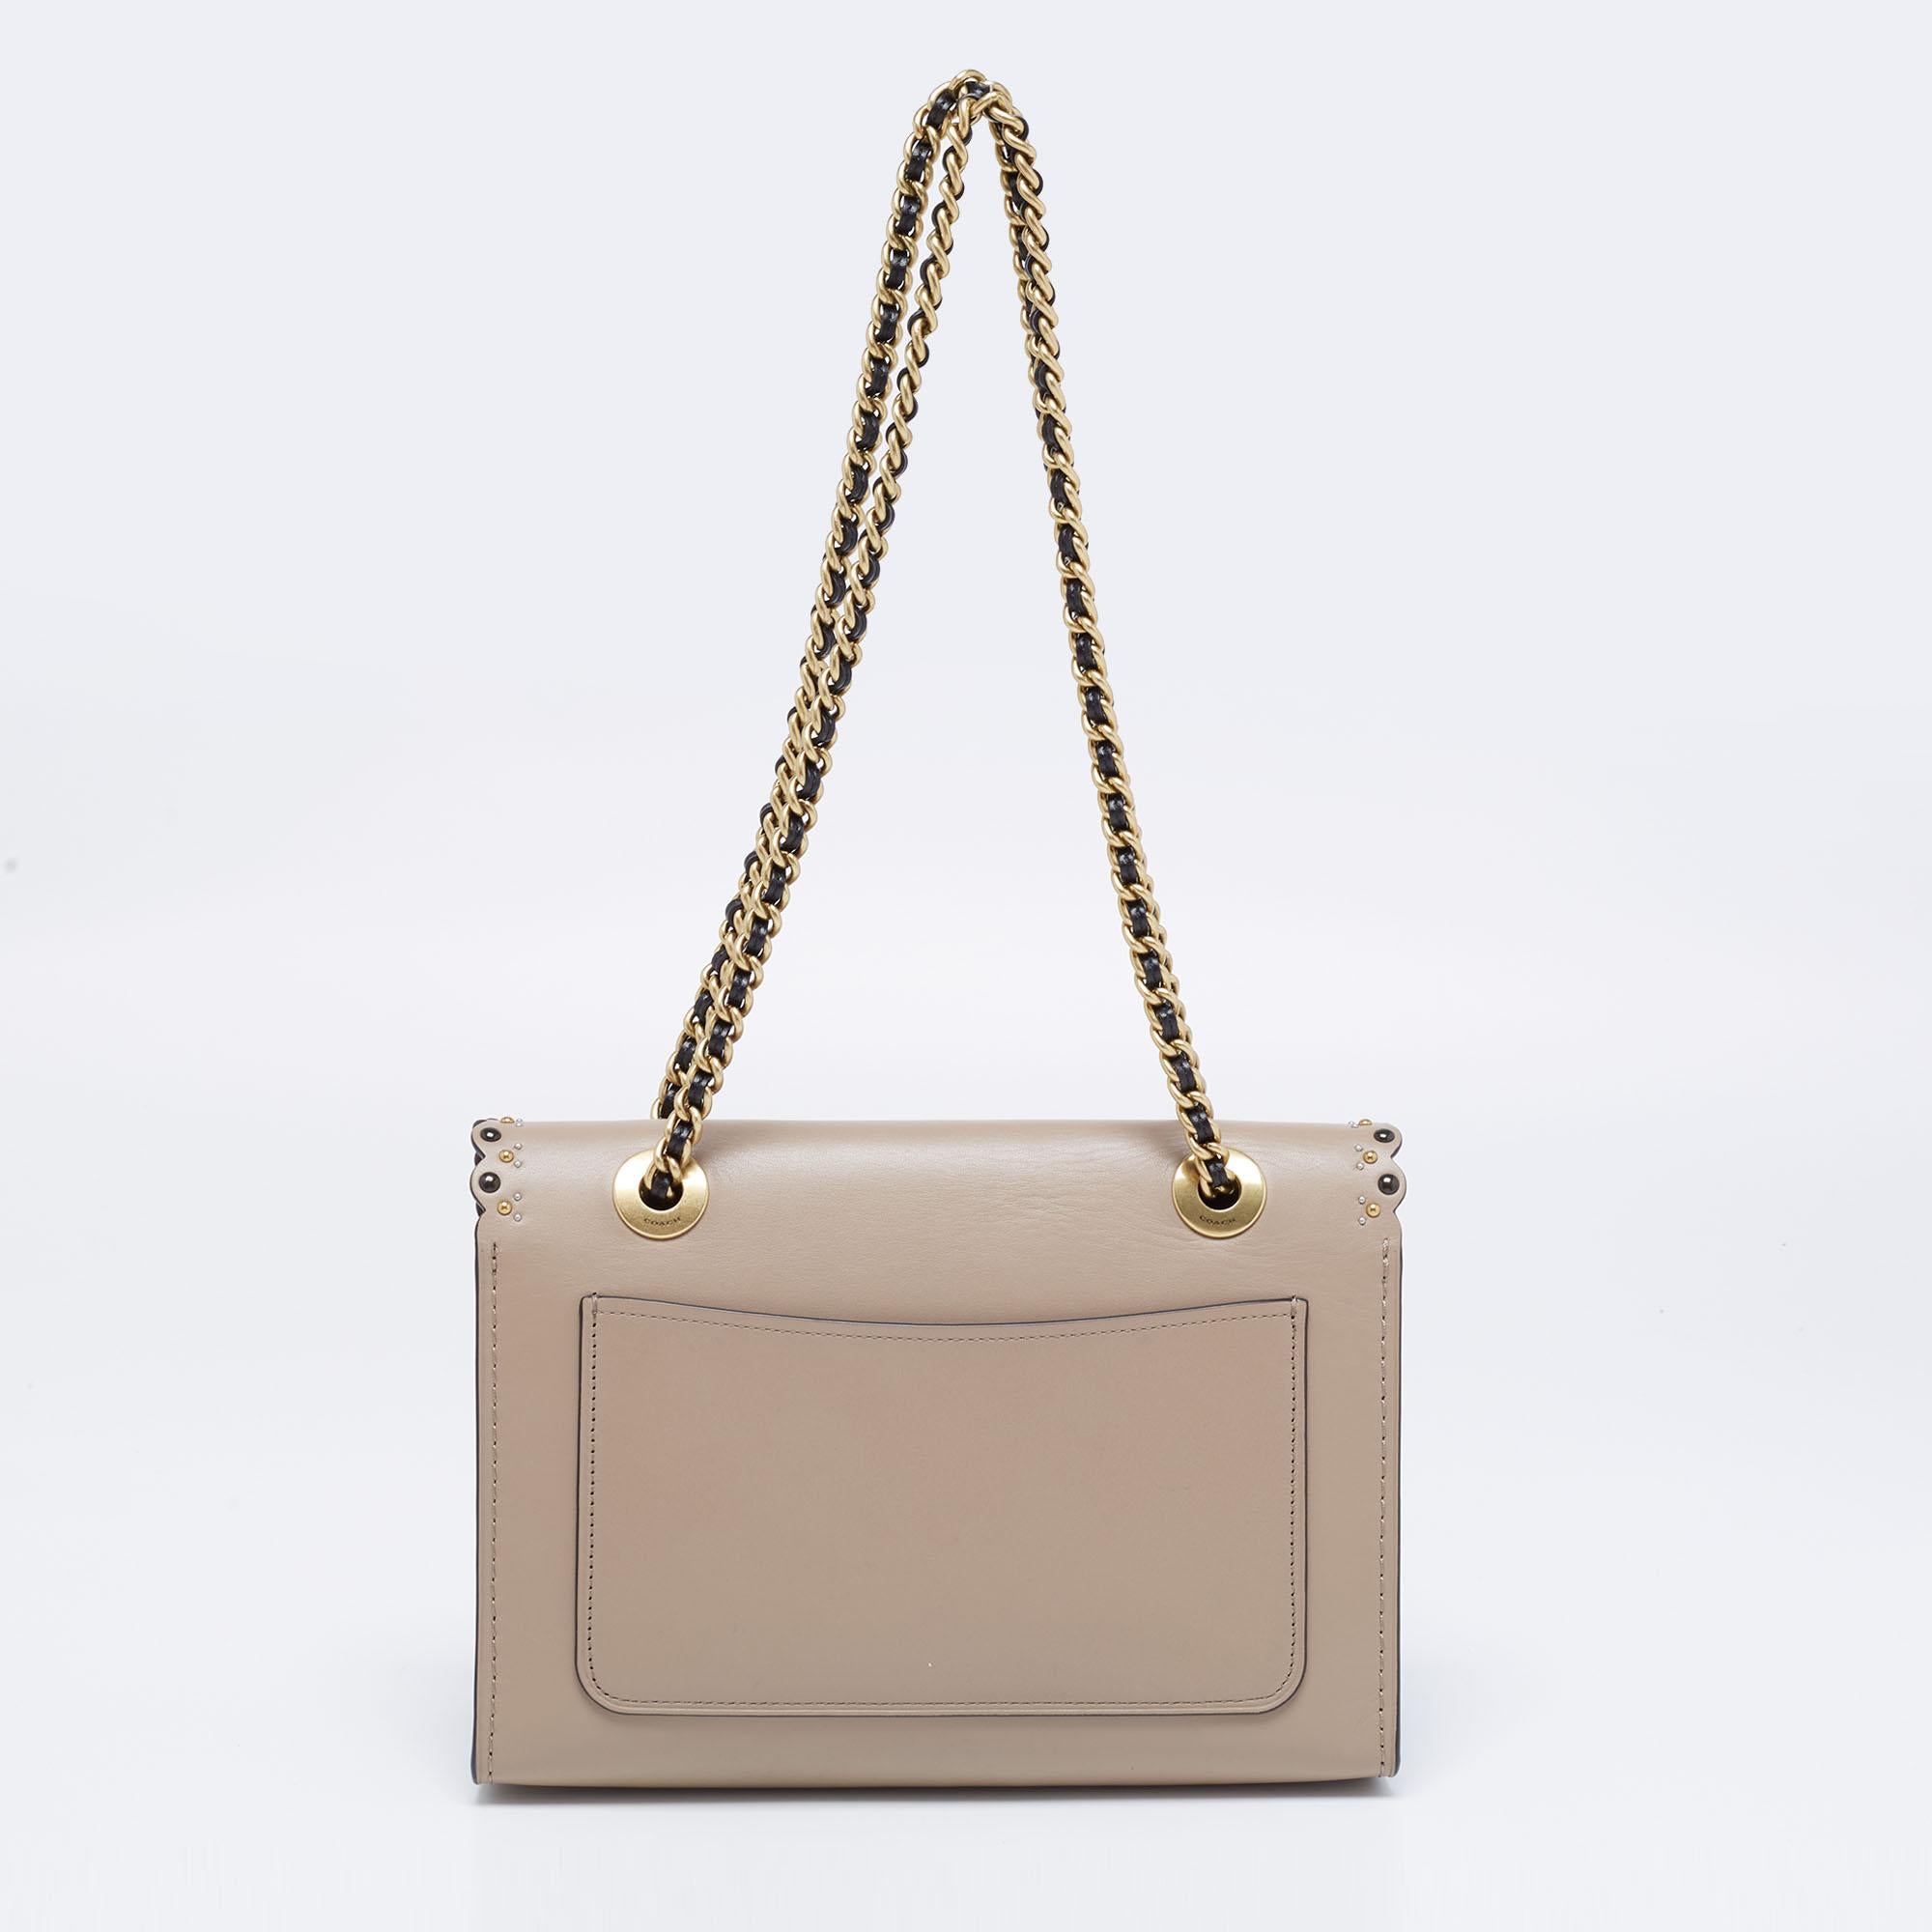 A classic design with a modern touch, this Coach shoulder bag is a beautiful accessory to compliment your outfits. Crafted from scalloped, studded leather, the bag is enhanced with gold-tone hardware and double chain handles. The cute turnlock